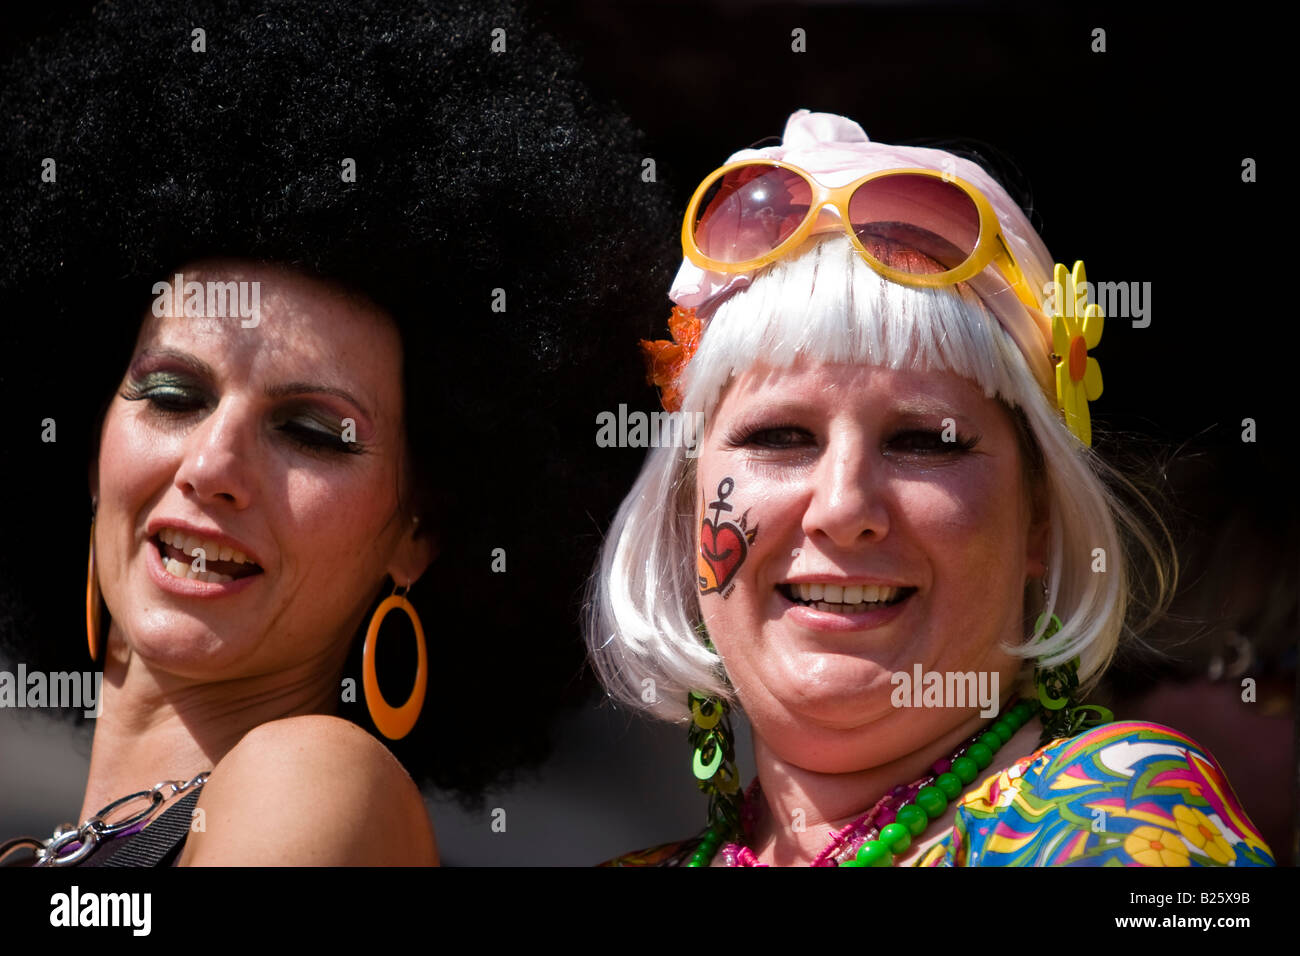 Two women wearing wigs and sunglasses during a german country music party the Schlagermove in Hamburg, Germany Stock Photo